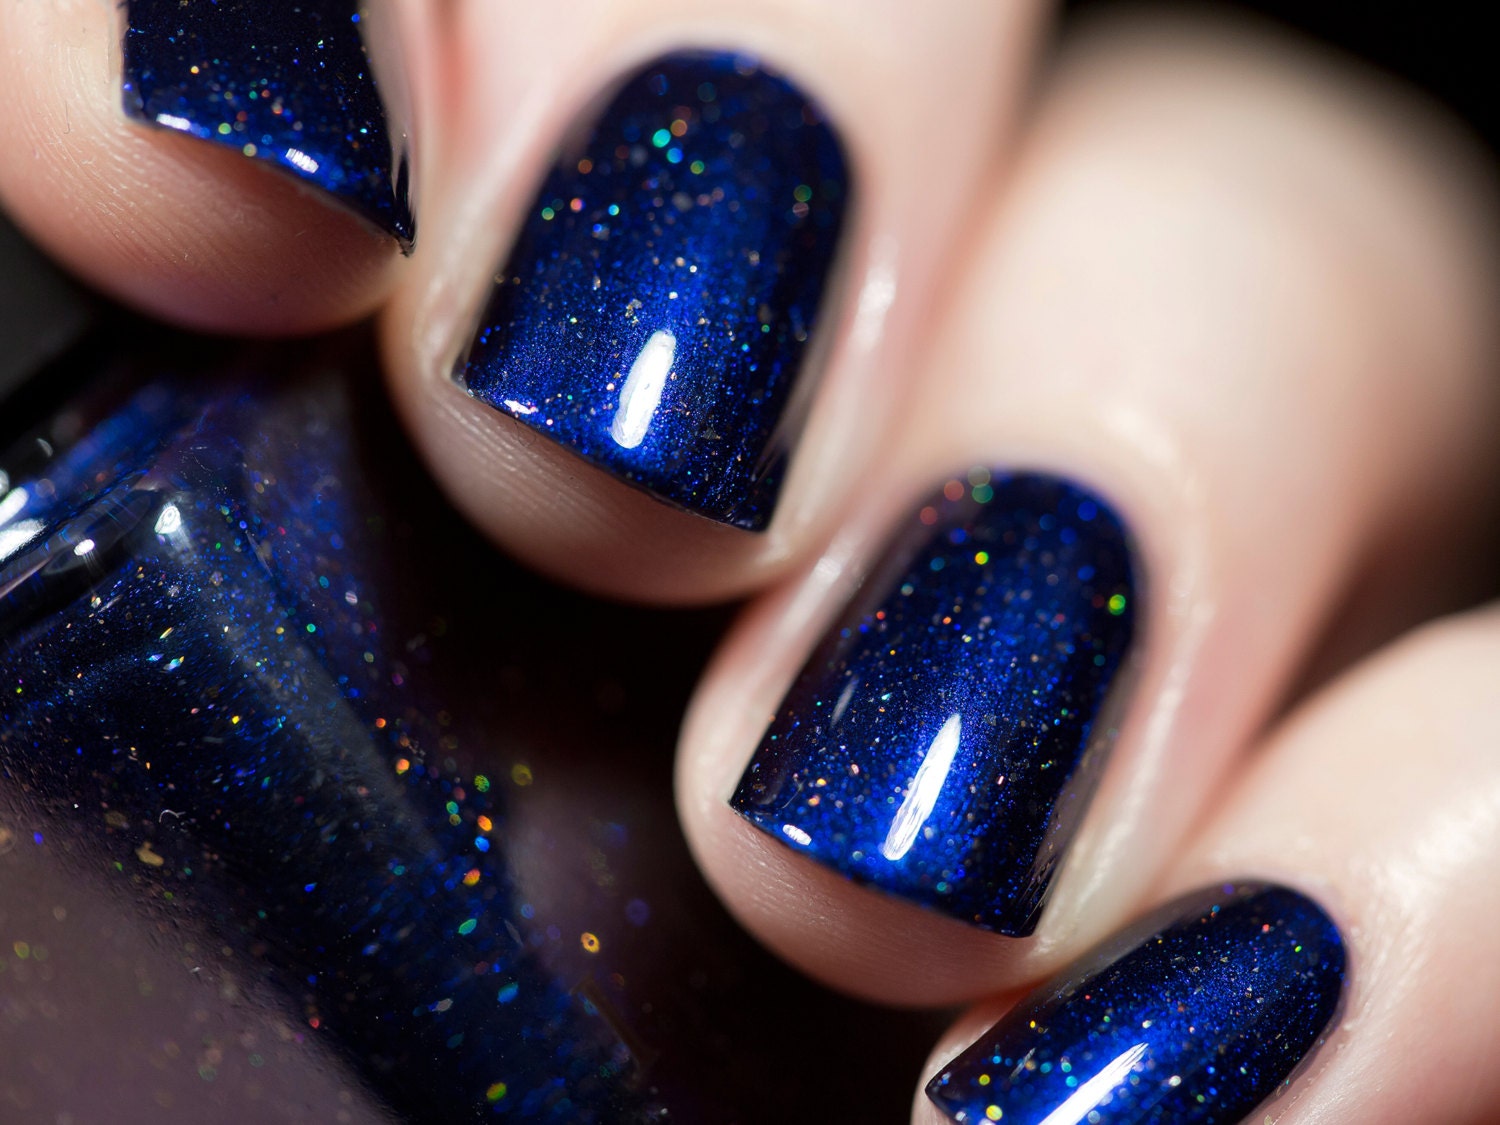 Maybelline Color Show Nail Lacquer, Midnight Blue - Walmart.com